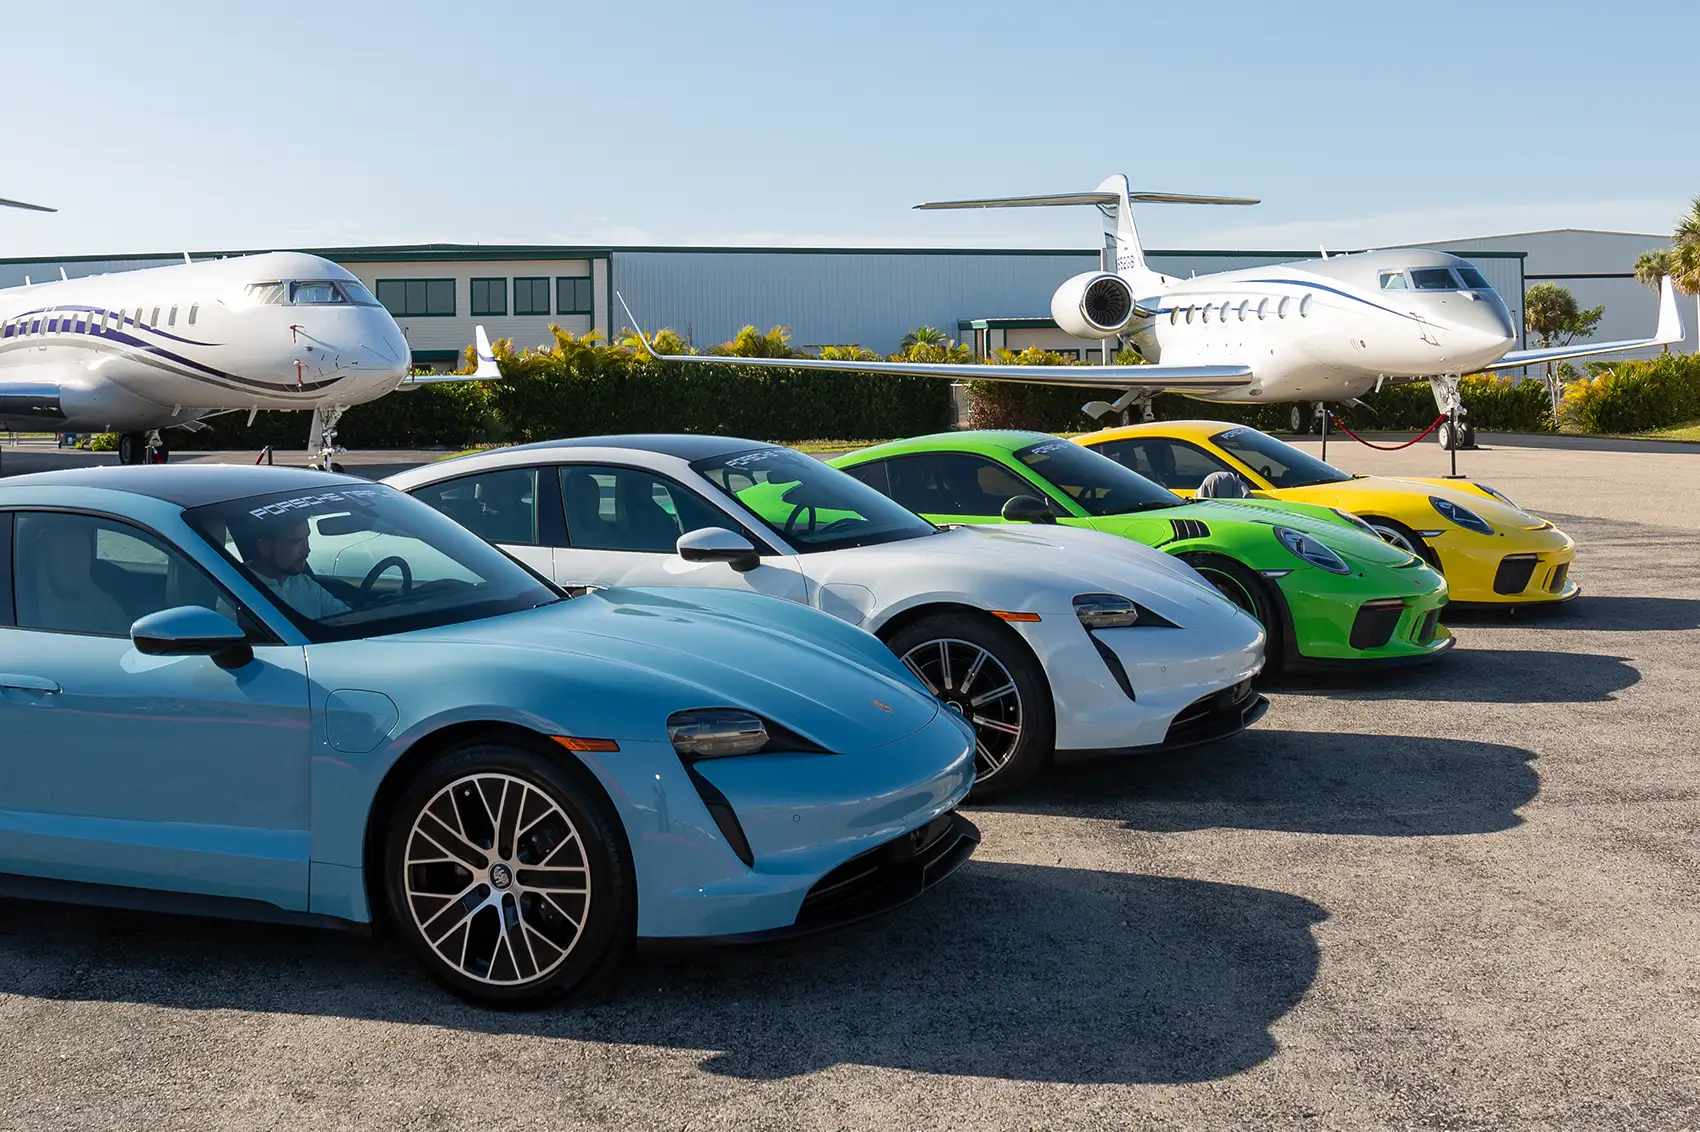 Two Jets with four Porsche, Naples jets private events